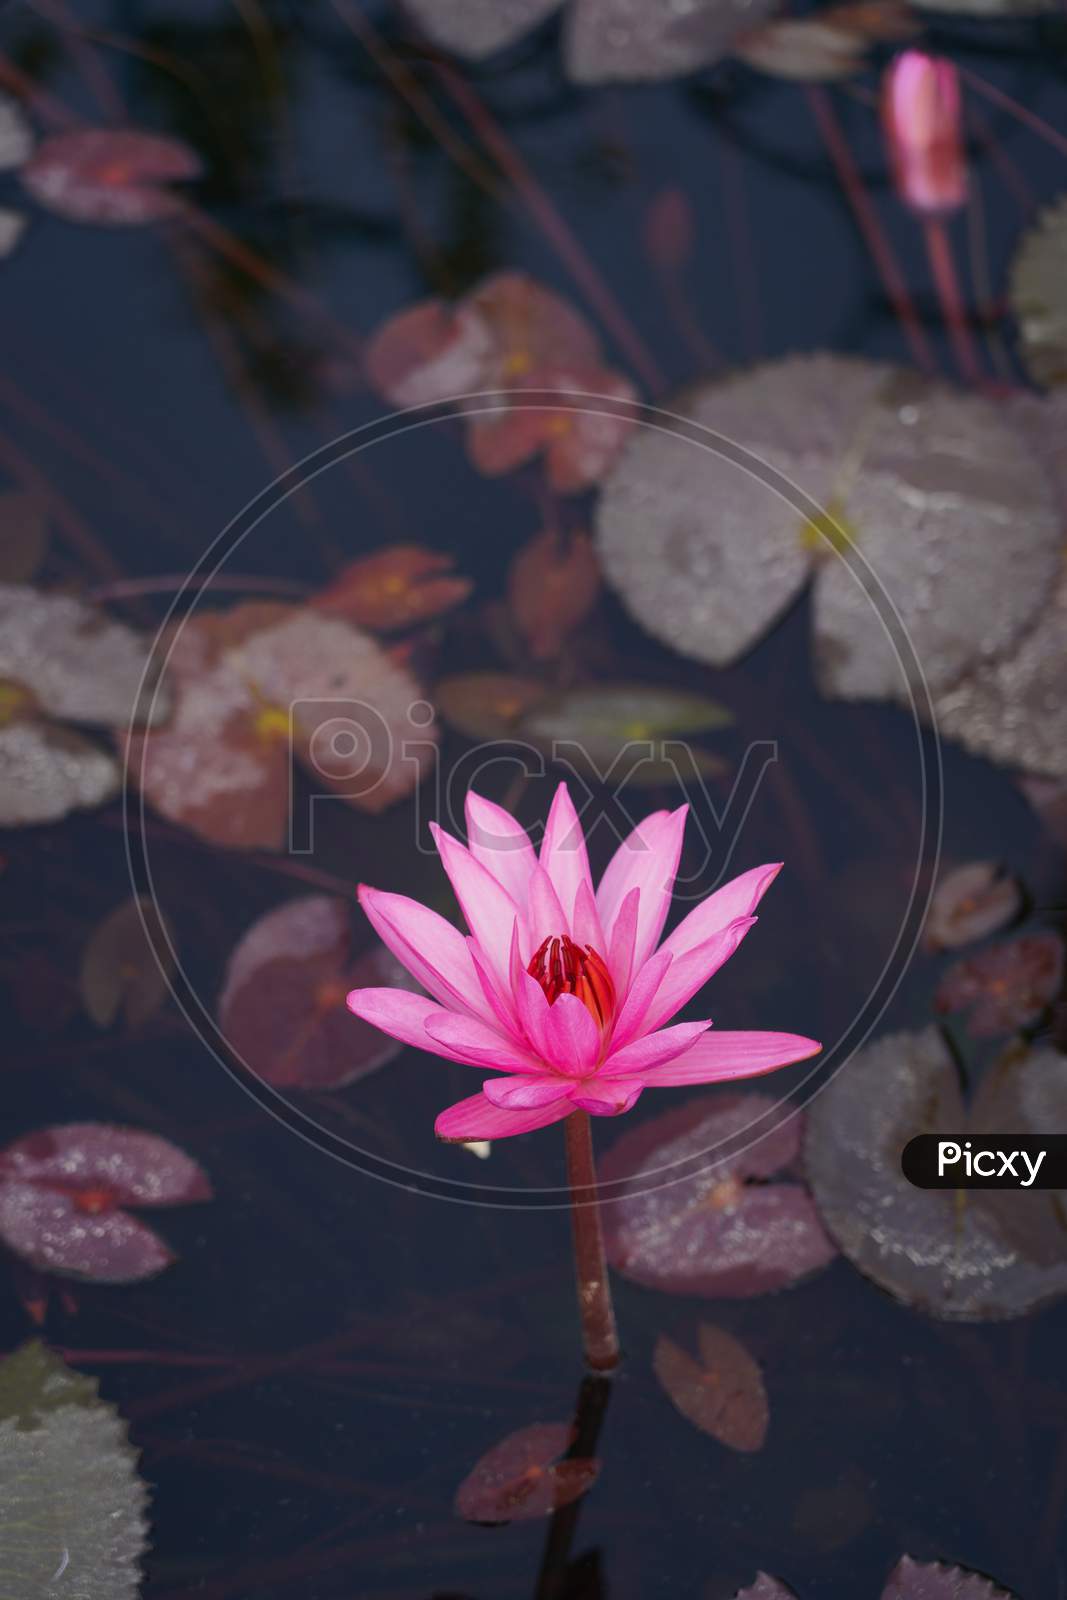 A Pink Color Lotus Flower In Blue Color Water Along With Other Leaves And Water Plants.